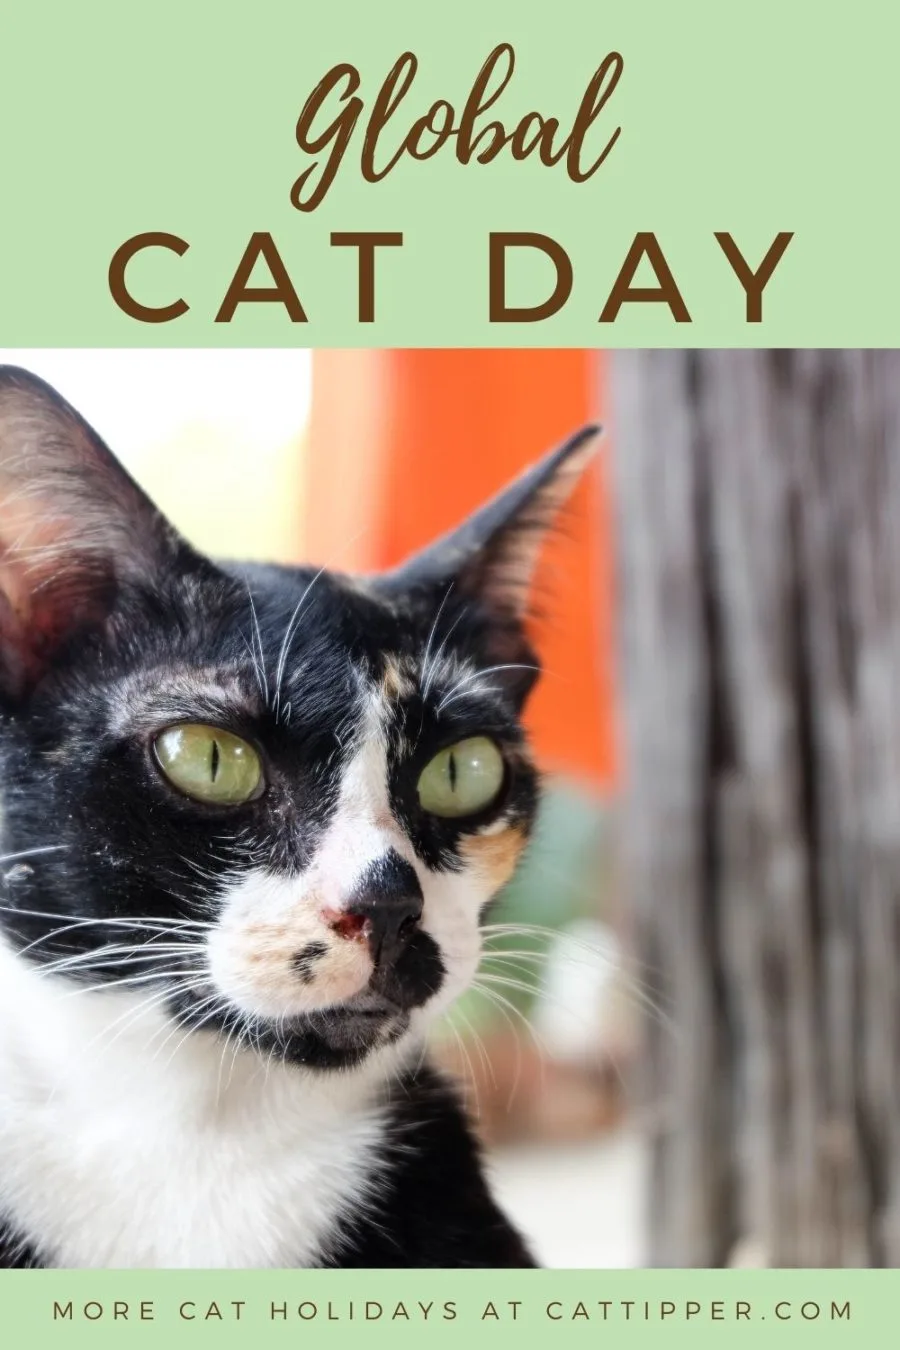 global cat day